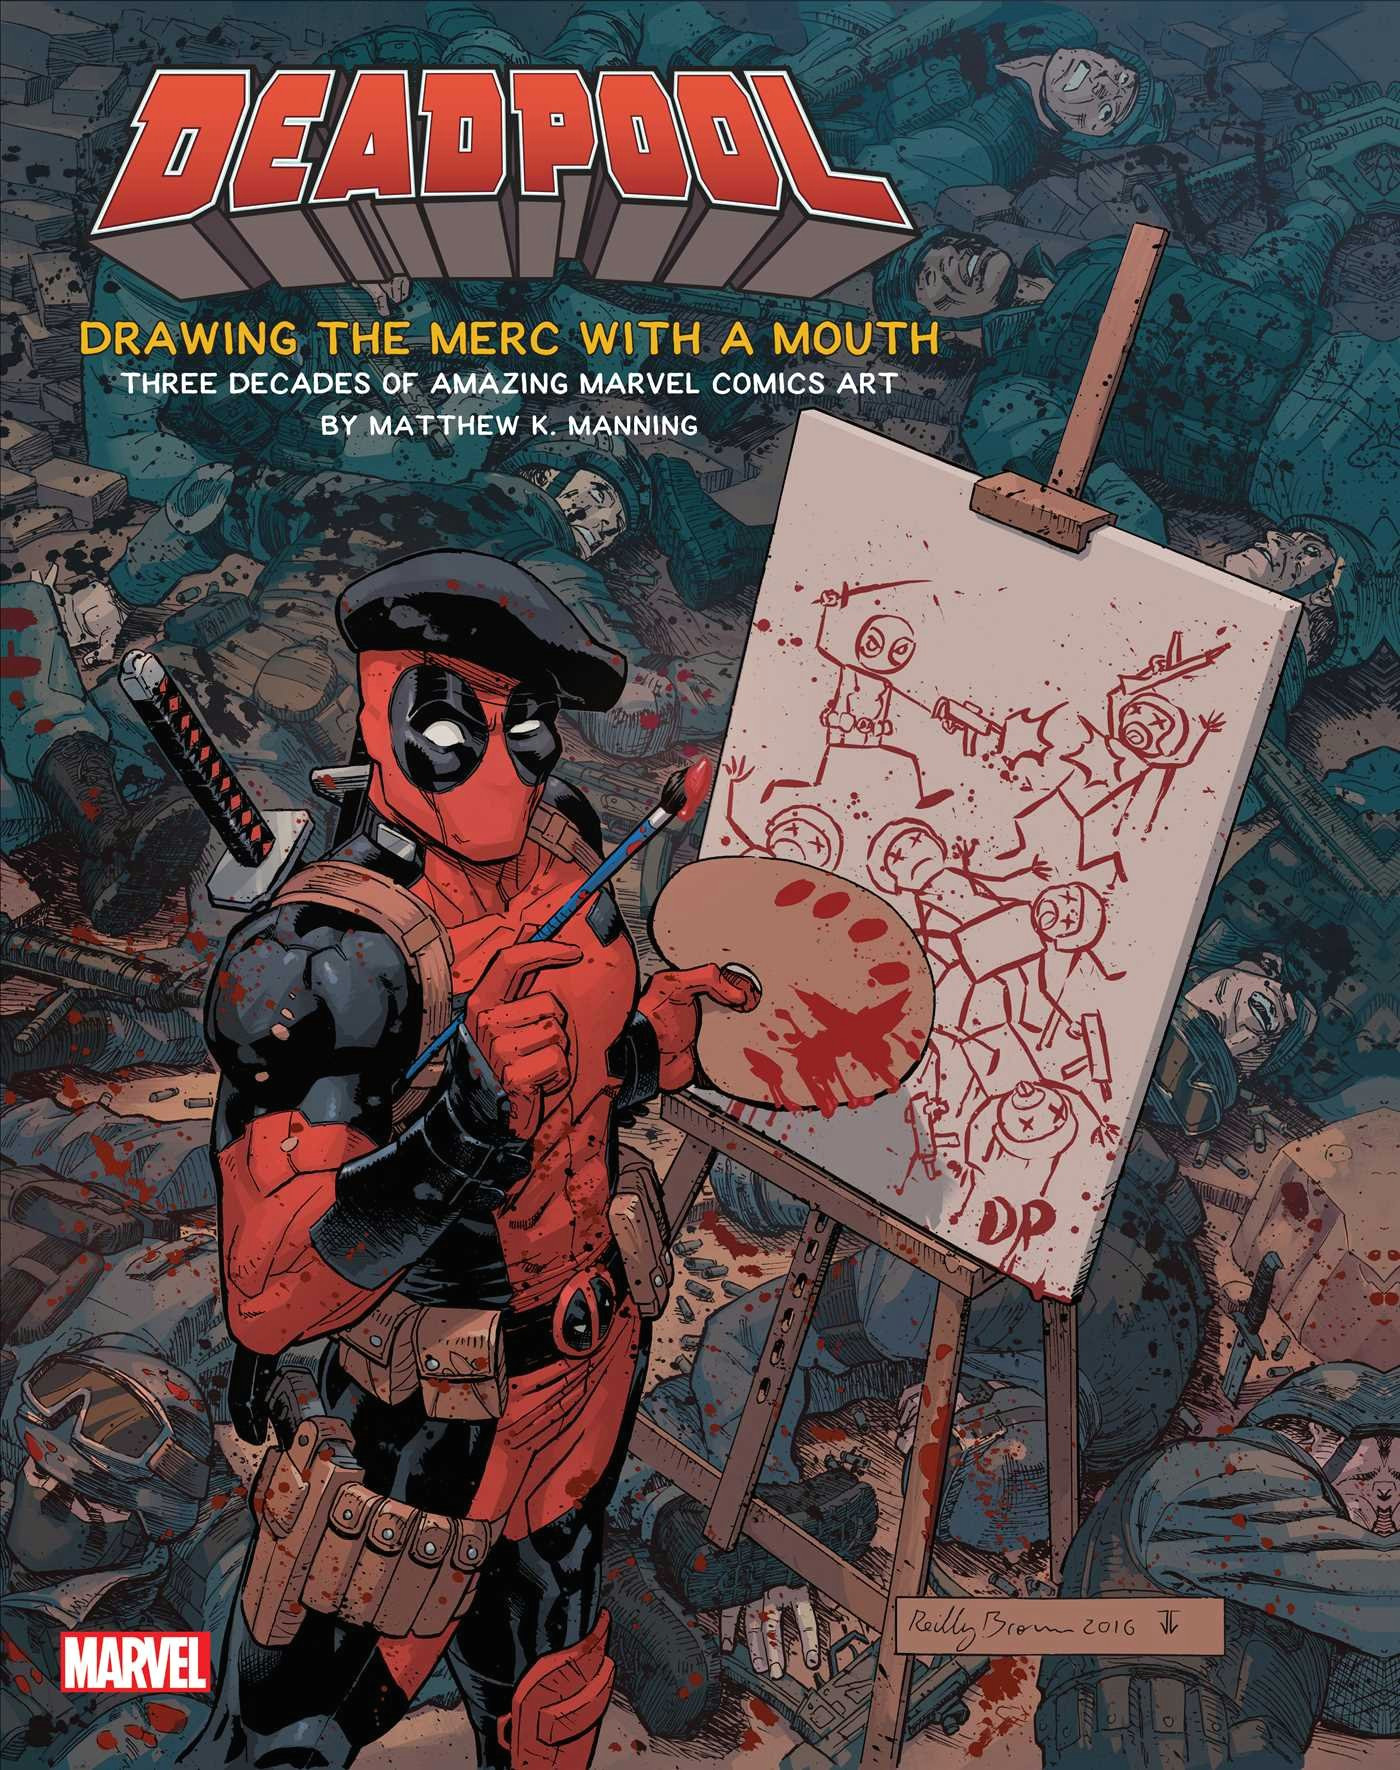 Deadpool 2 Drawing Easy Amazon Com Deadpool Drawing the Merc with A Mouth Three Decades